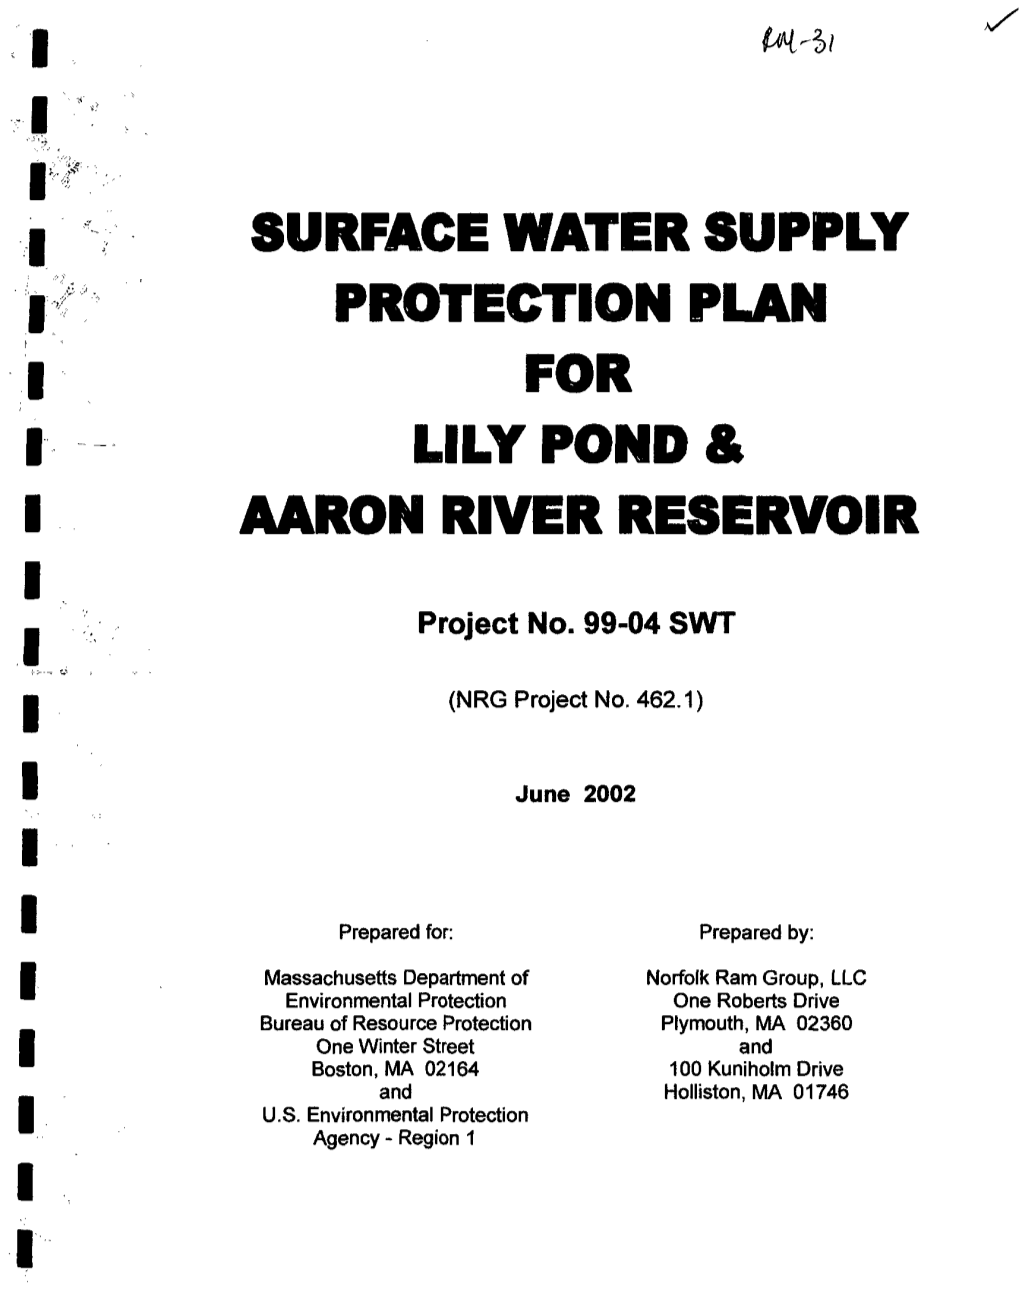 Surface Water Supply Protection Plan for Lily Pond & Aaron River Reservoir